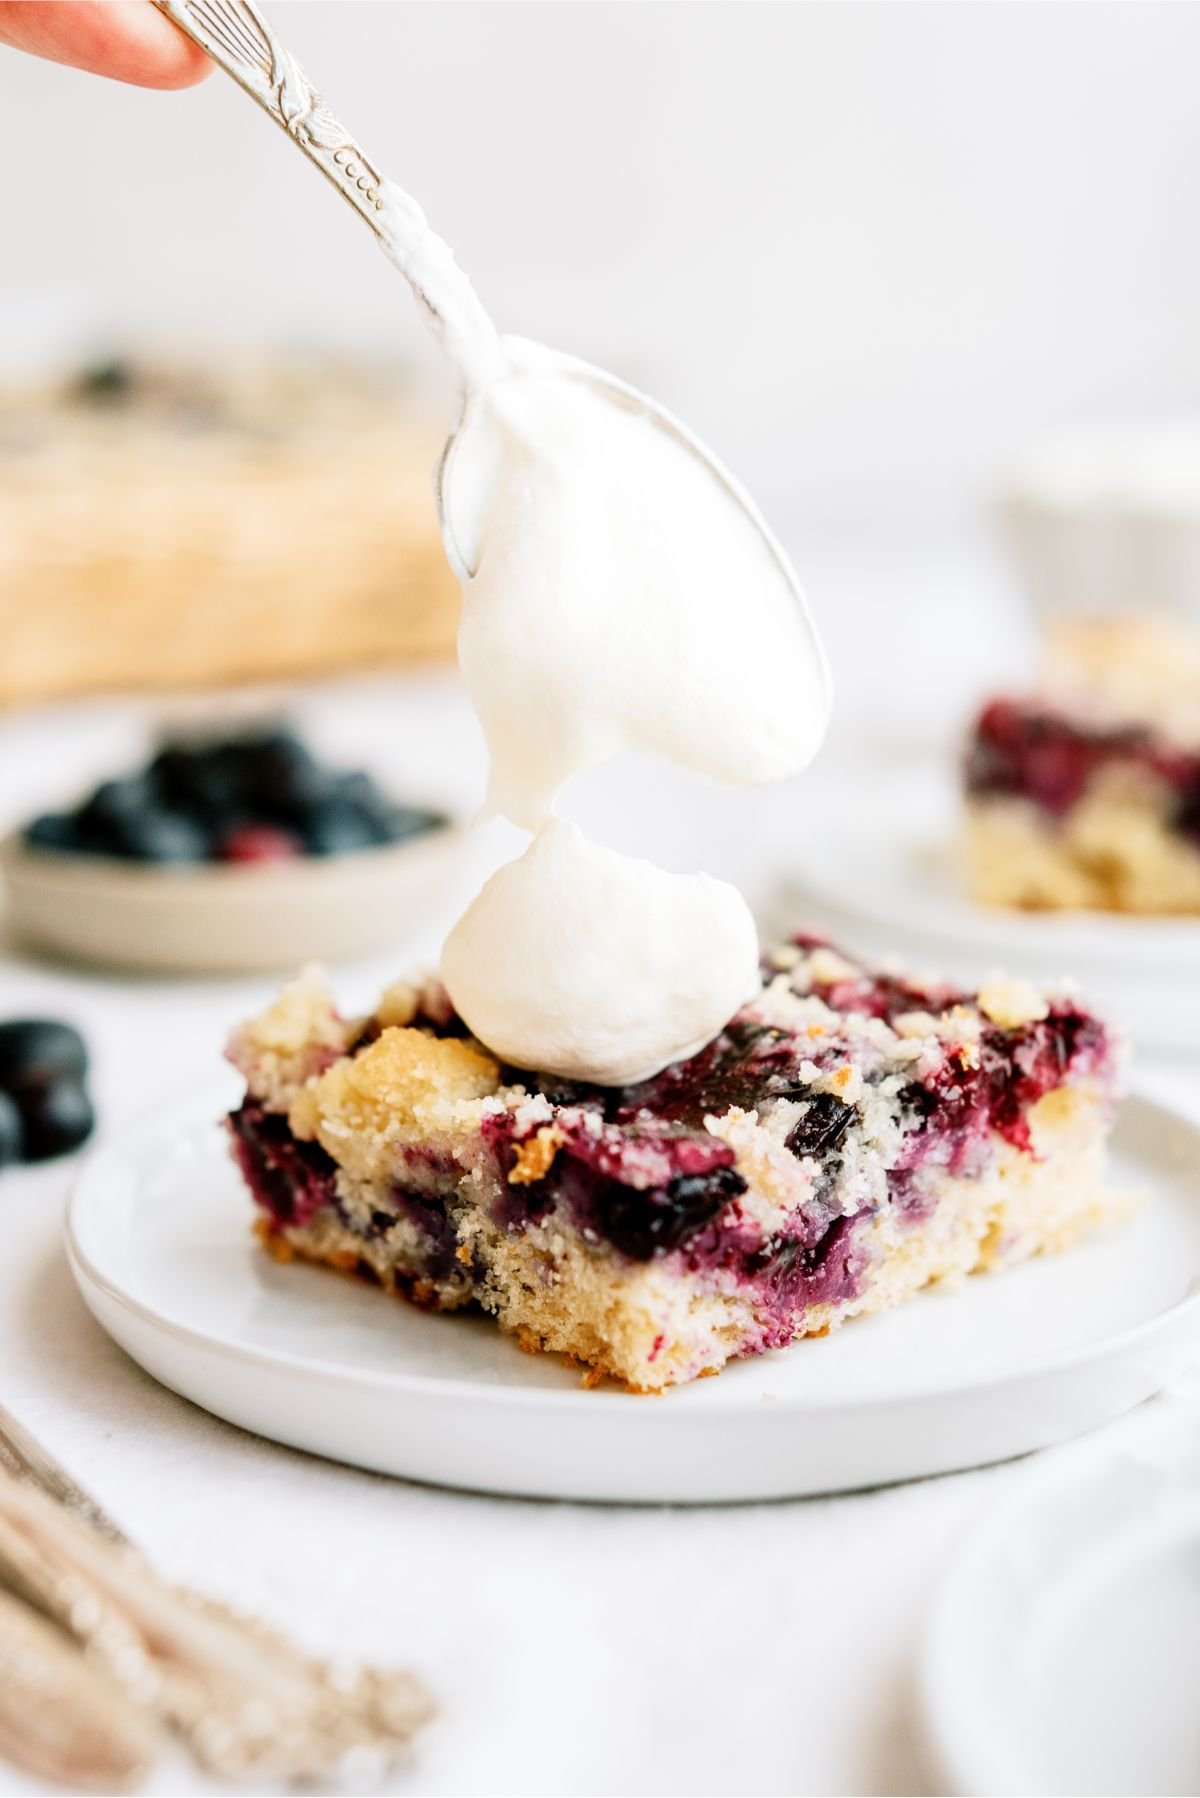 Placing a dollop of whipped topping on top of a square of Blueberry Coffee Cake